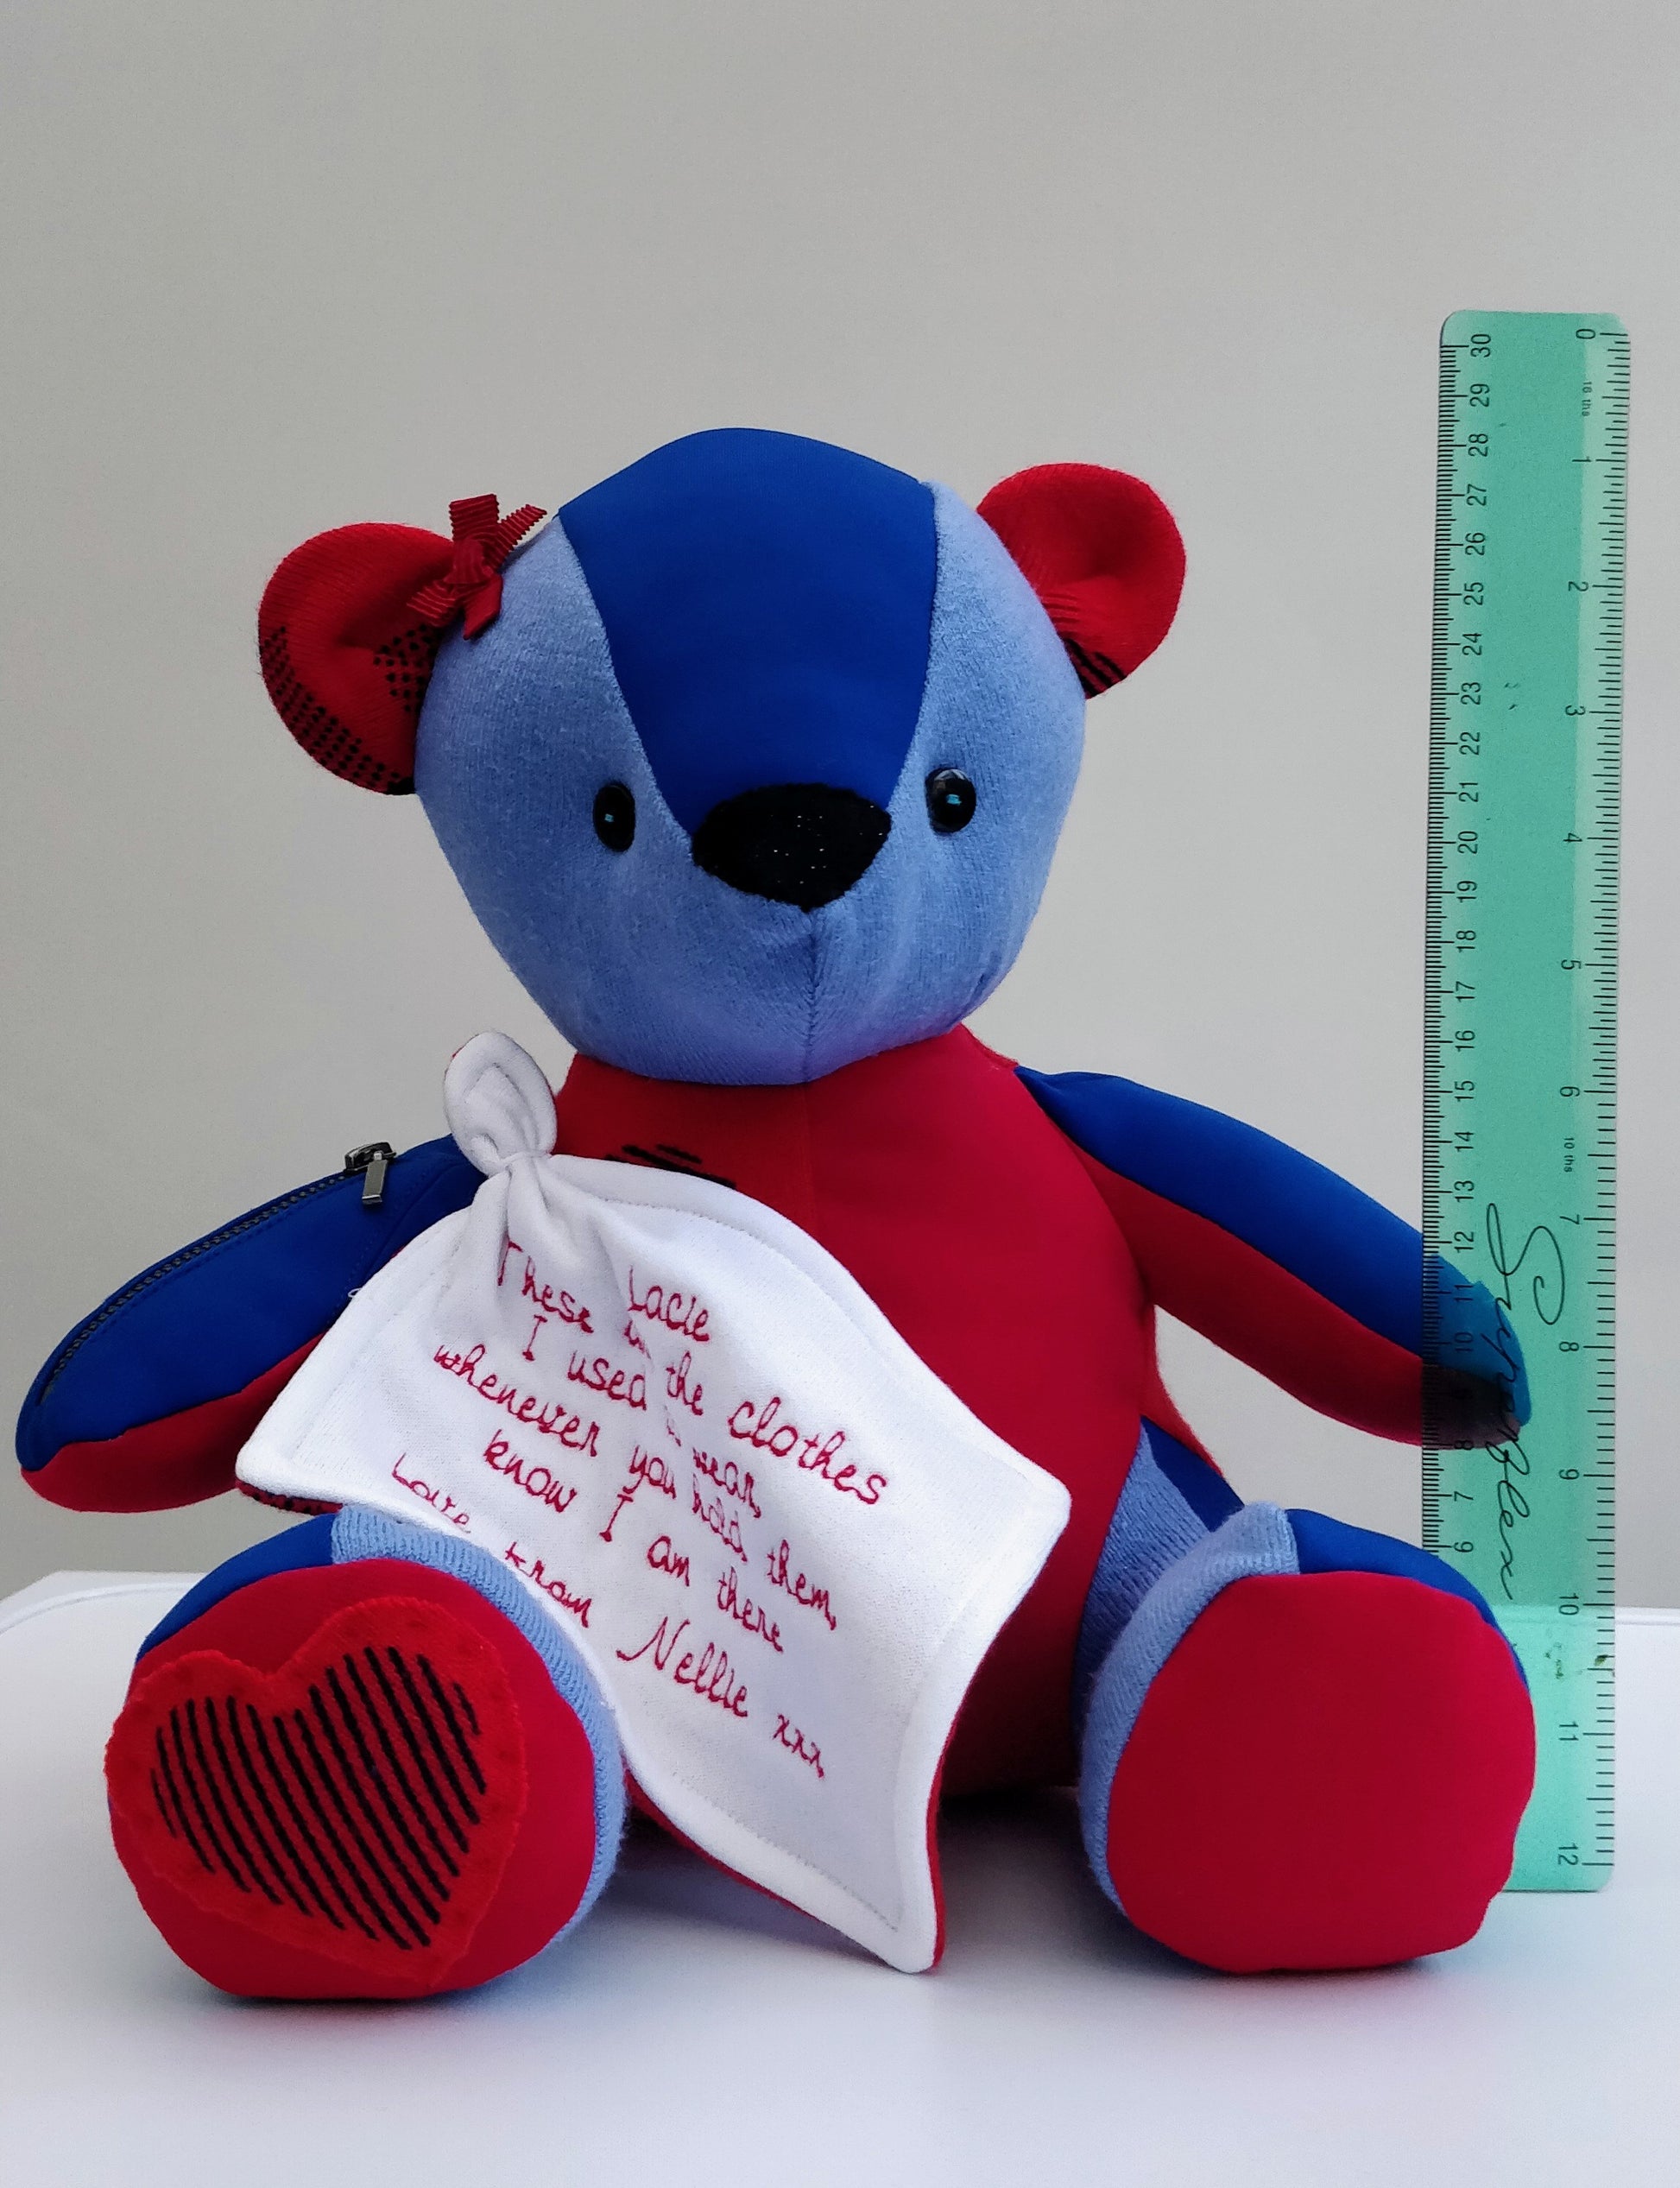 Memory Bear Template Ruler Set(10 PCS) - Make Your Own Bear with